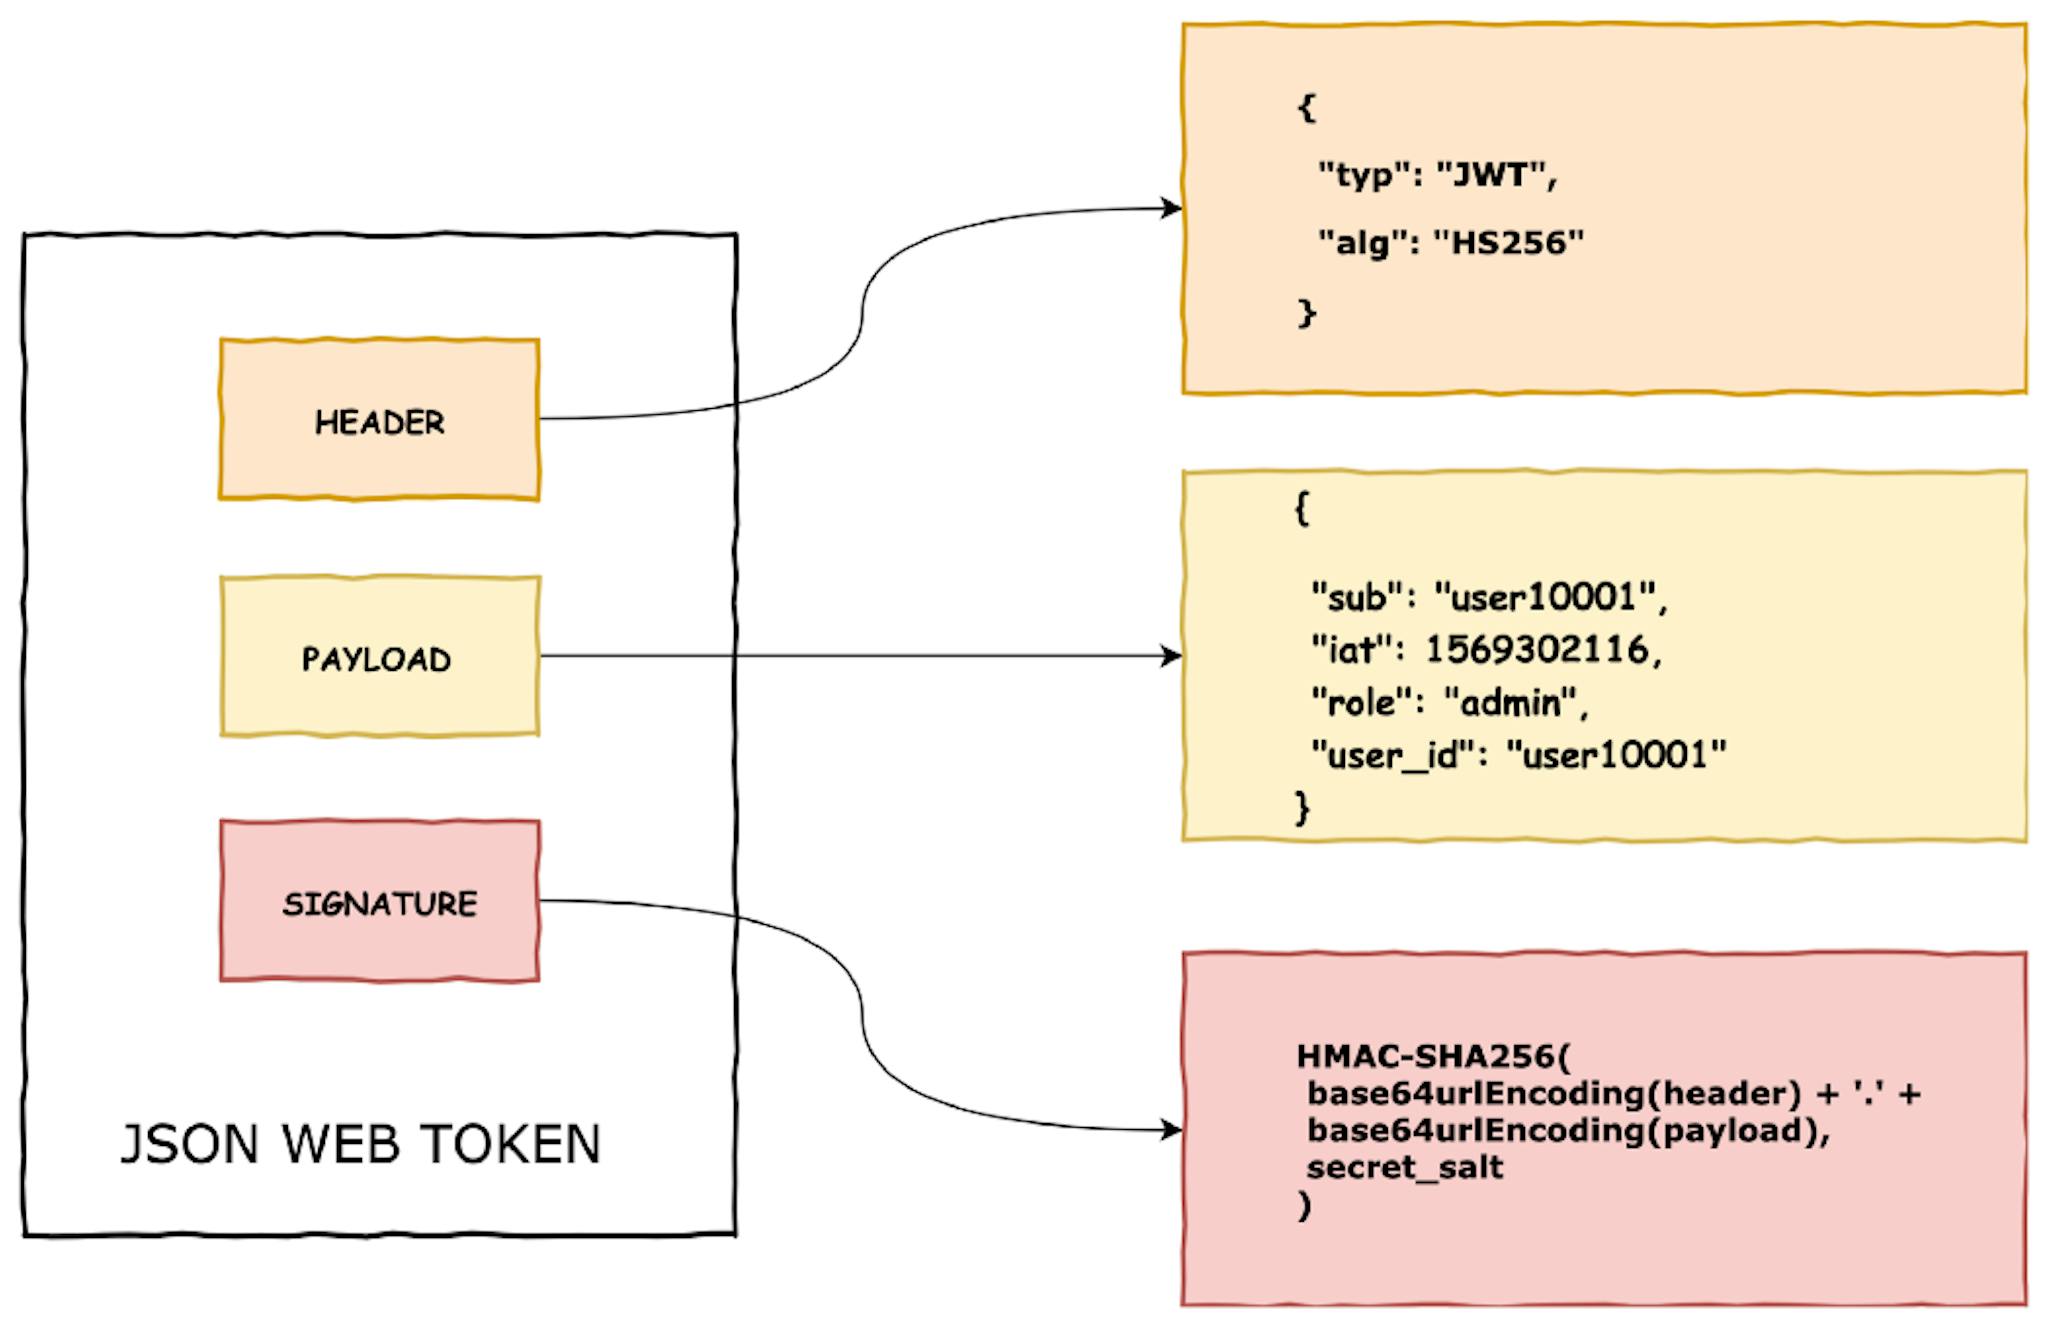 Structure of JSON Web Token (JWT)